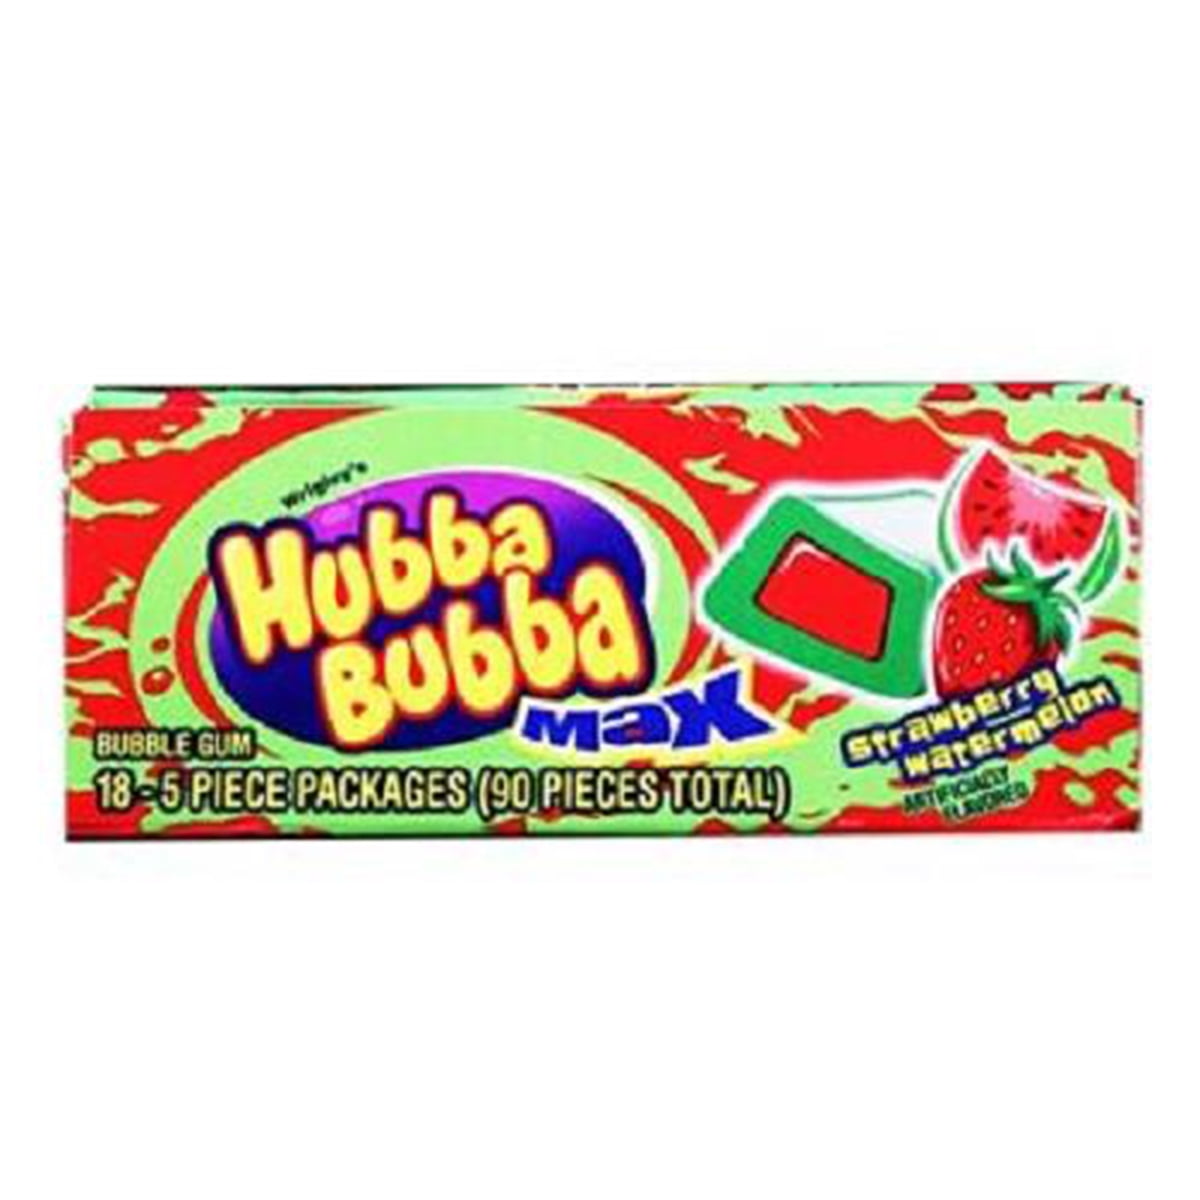 Hubba Bubba 20 Packs Of 5 STRAWBERRY Chewing Gum 100 x Party Birthday 1  FULL BOX